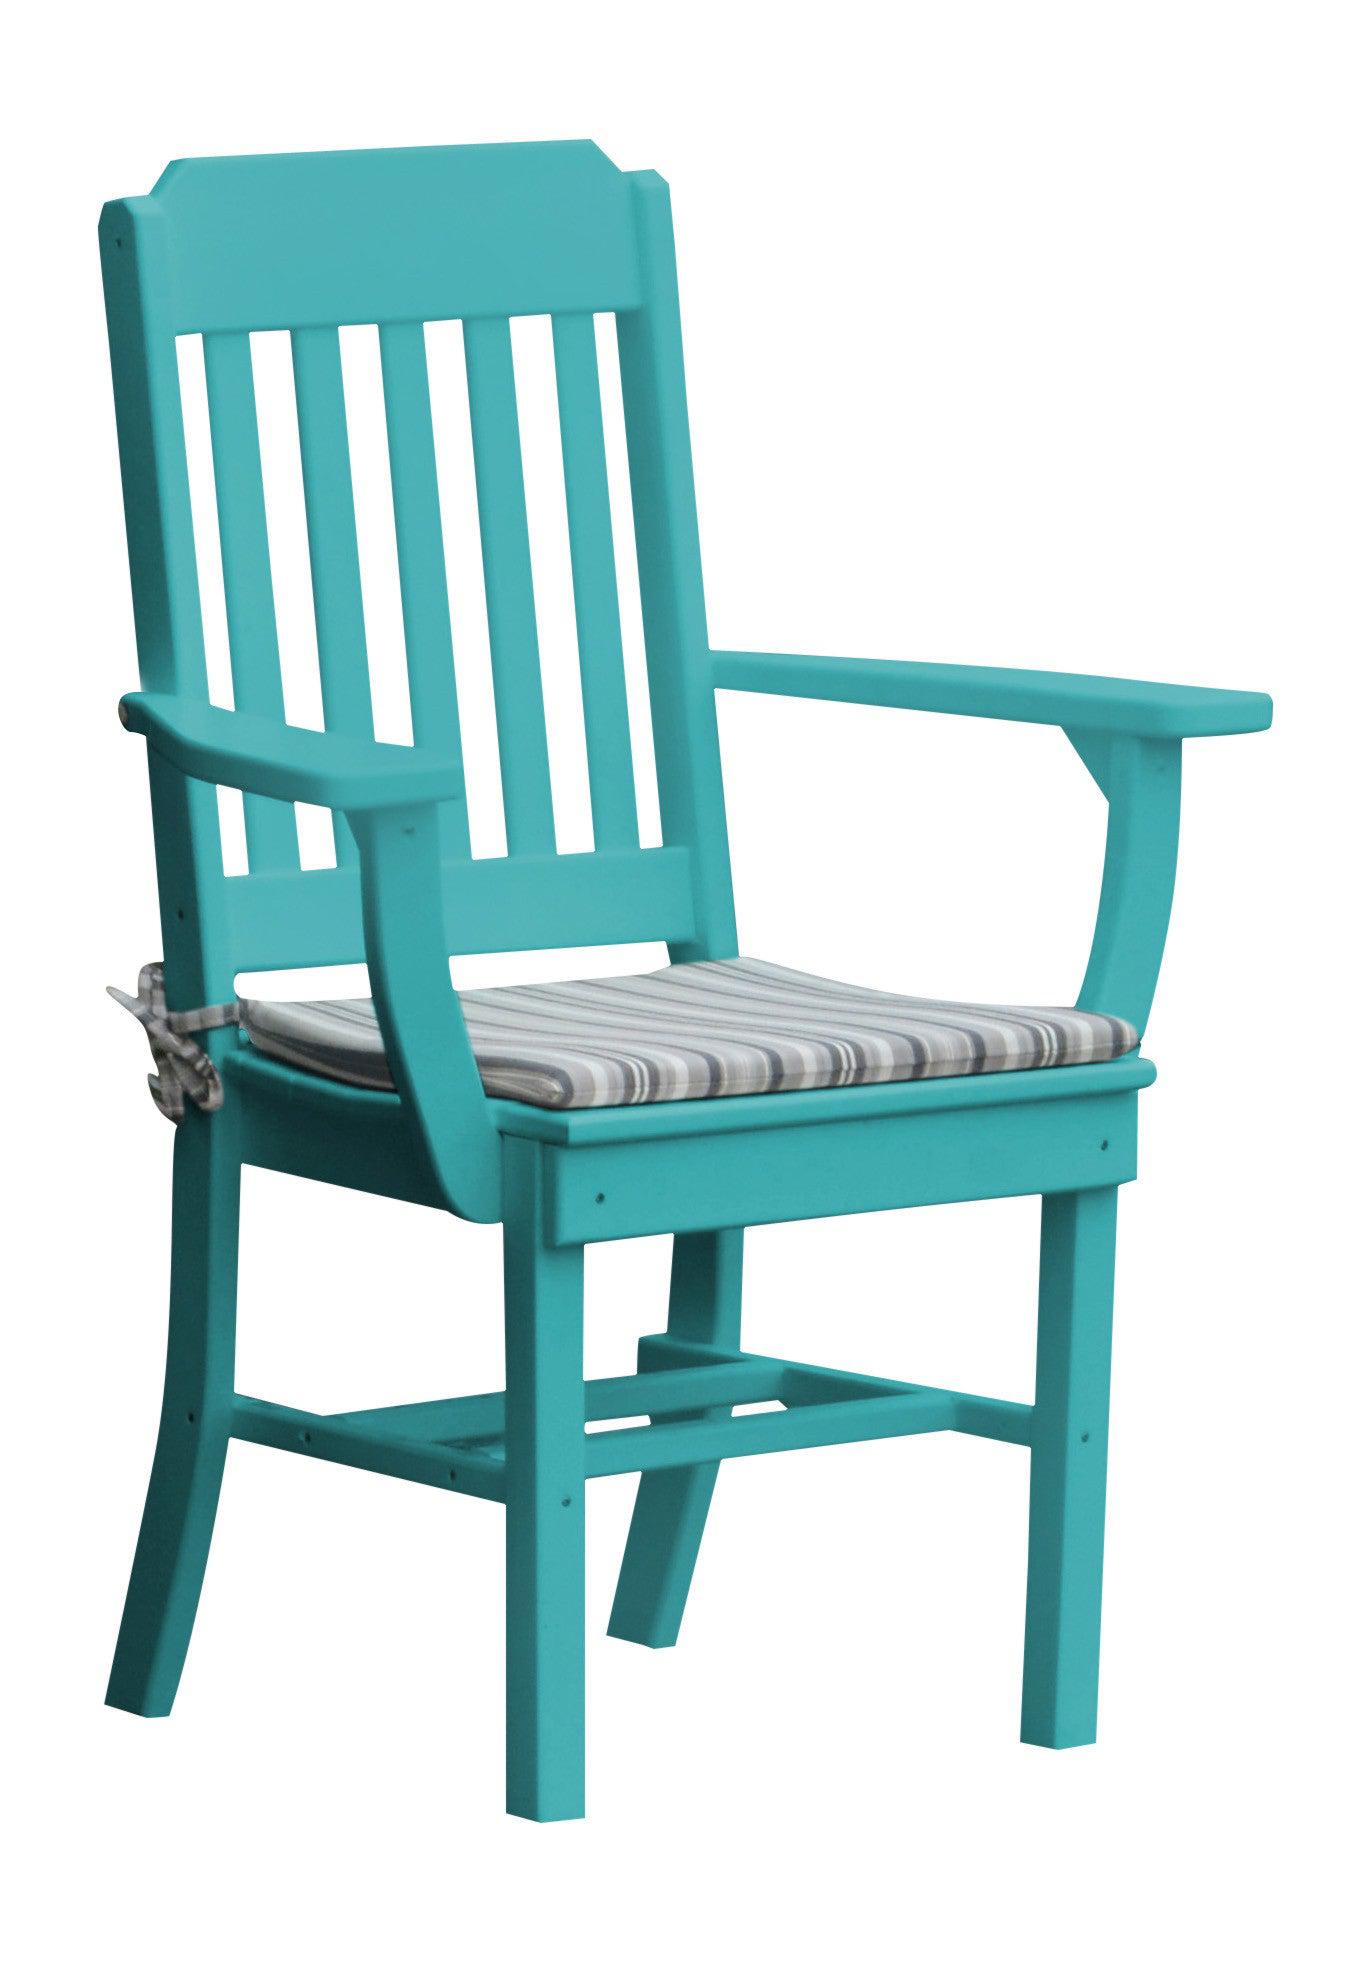 A&L Furniture Company Recycled Plastic Traditional Dining Chair w/ Arms - Aruba Blue